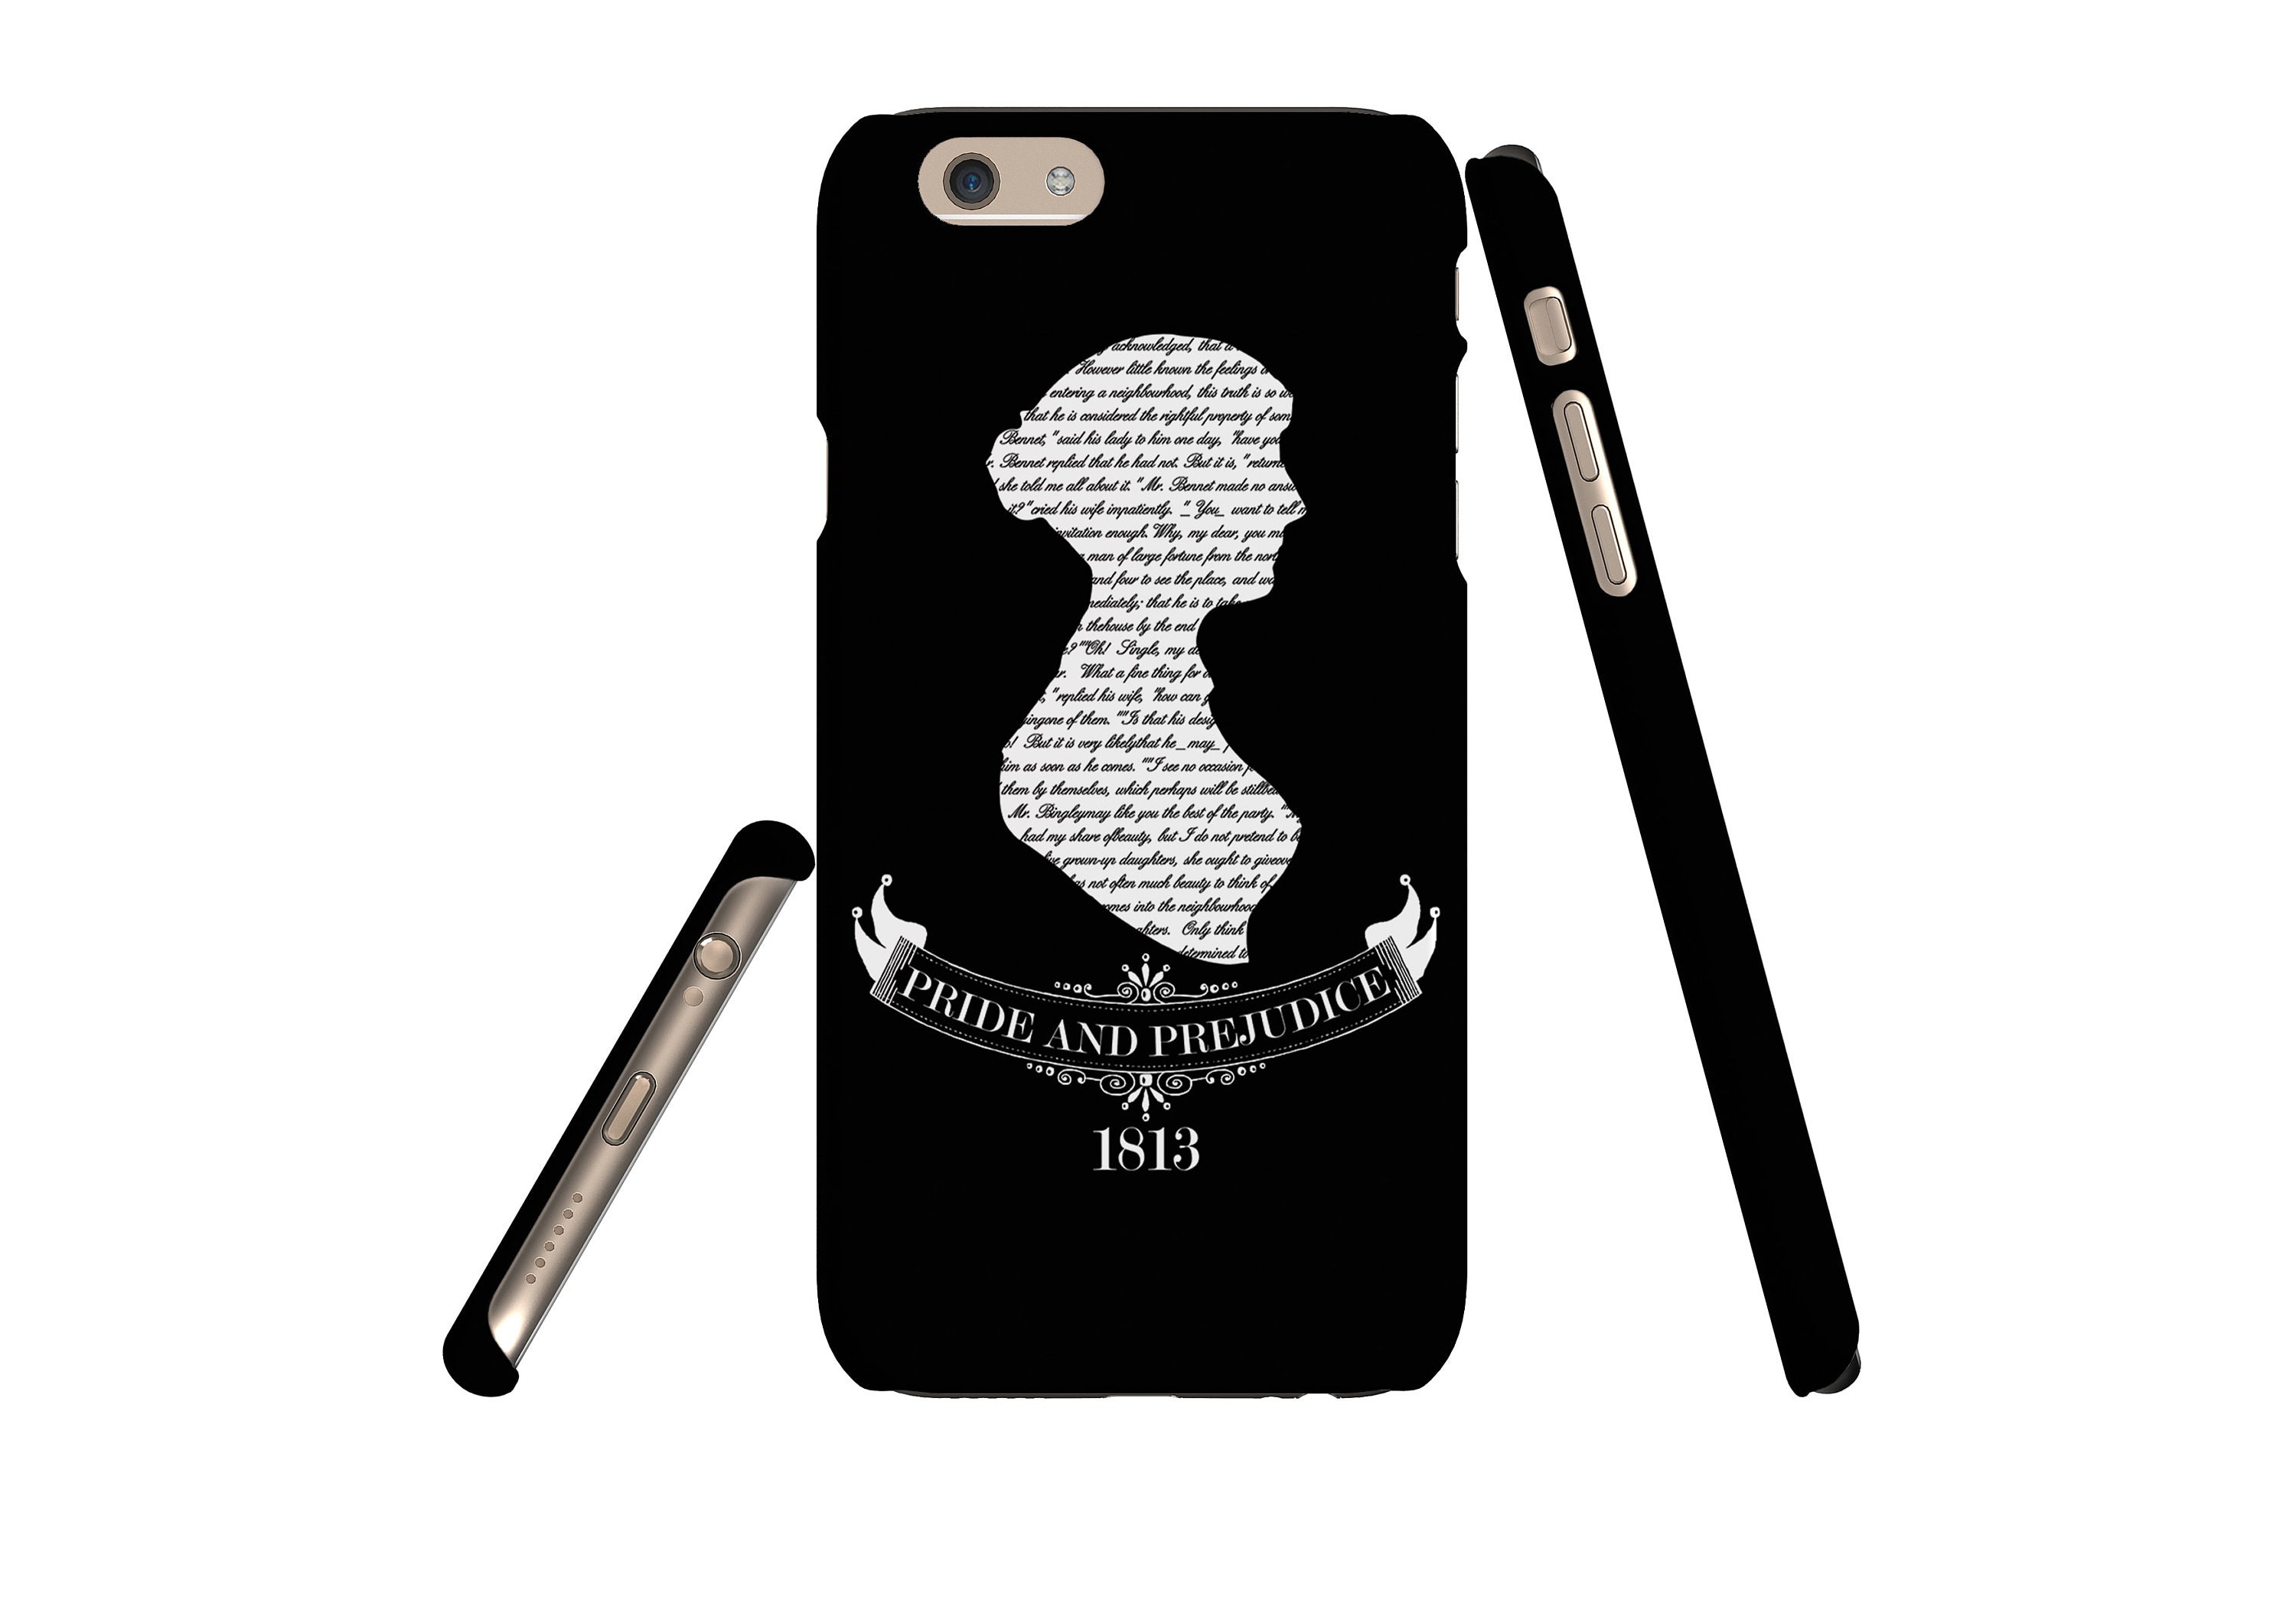 iPhone 5/5s Wallet Case for iPhone 8 Plus iPhone 6s iPhone 7 iPhone 7 Plus Jane Austen Pemberley Case iPhone 6 iPhone 8